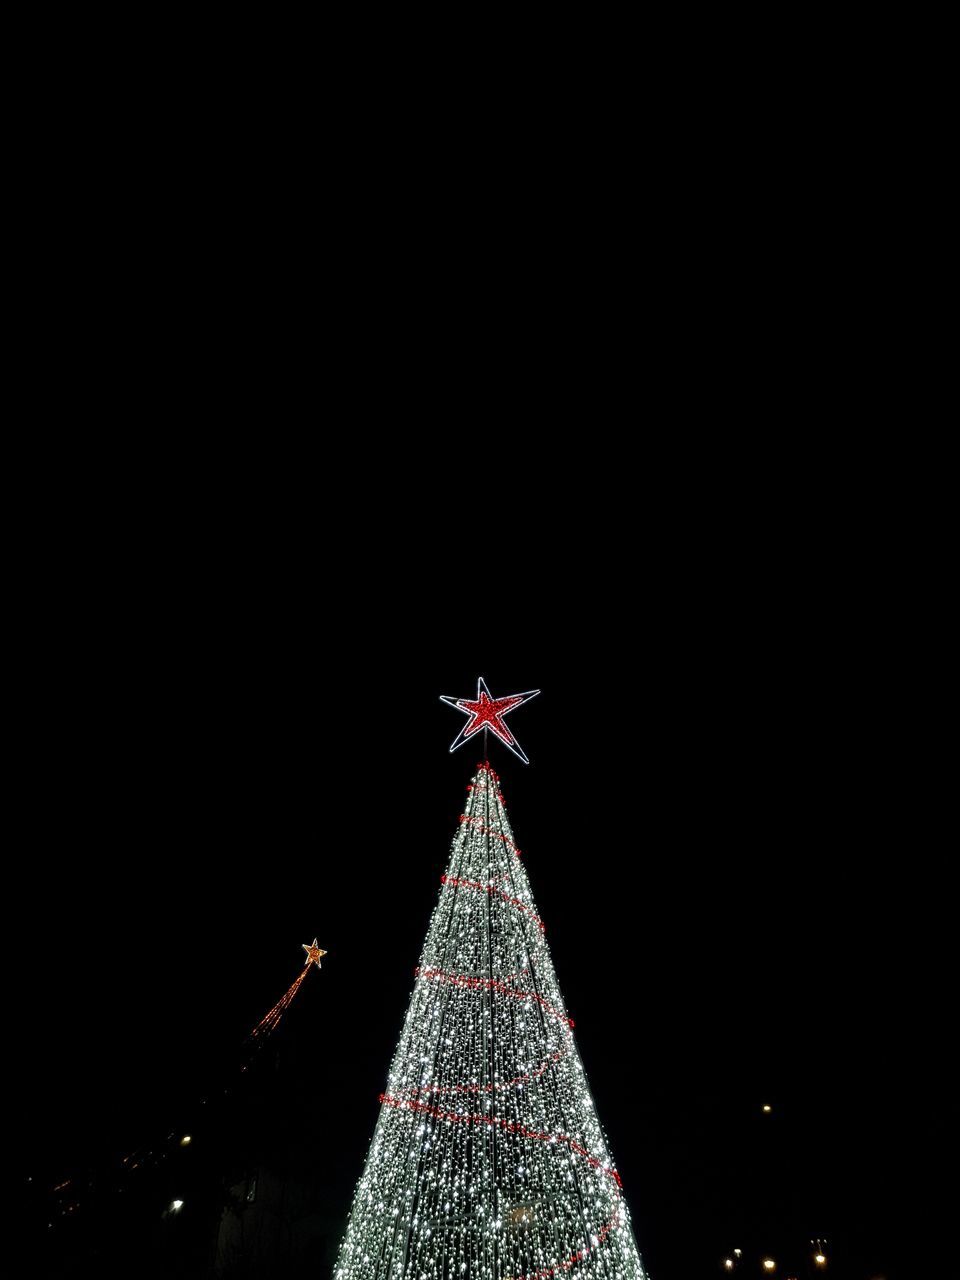 ILLUMINATED CHRISTMAS TREE AGAINST SKY AT NIGHT DURING FESTIVAL